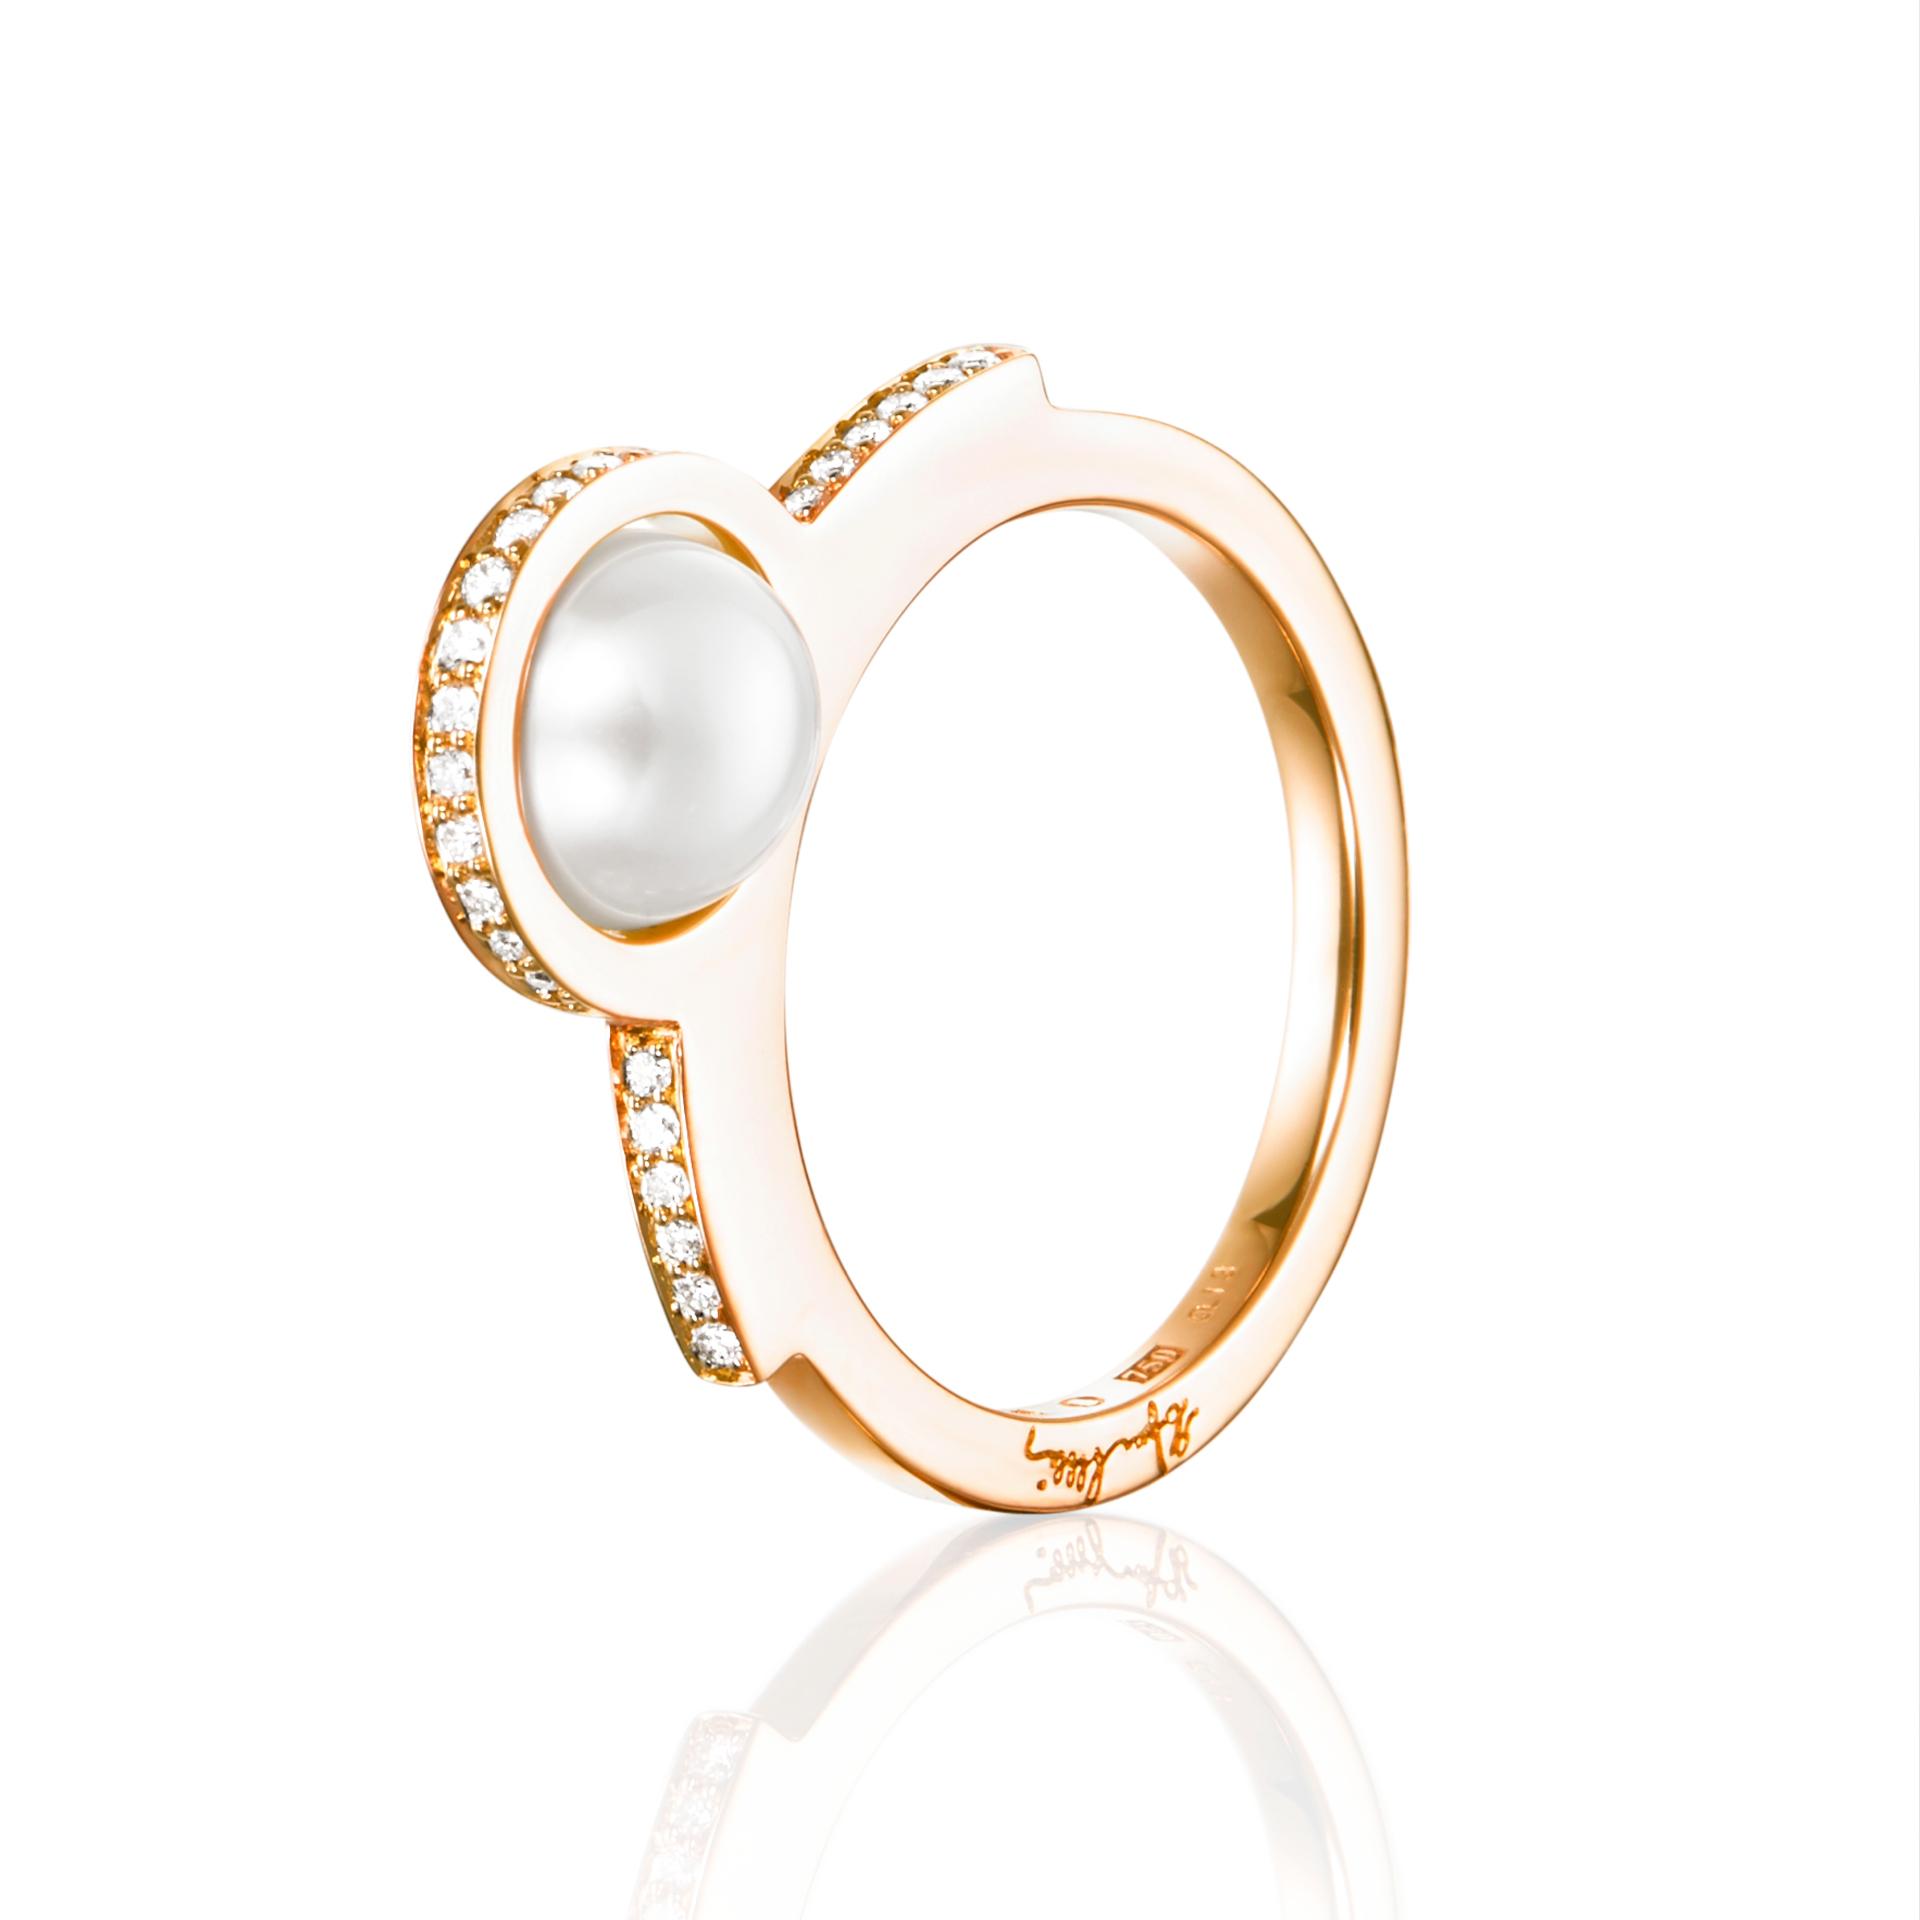 DAY PEARL & STARS RING